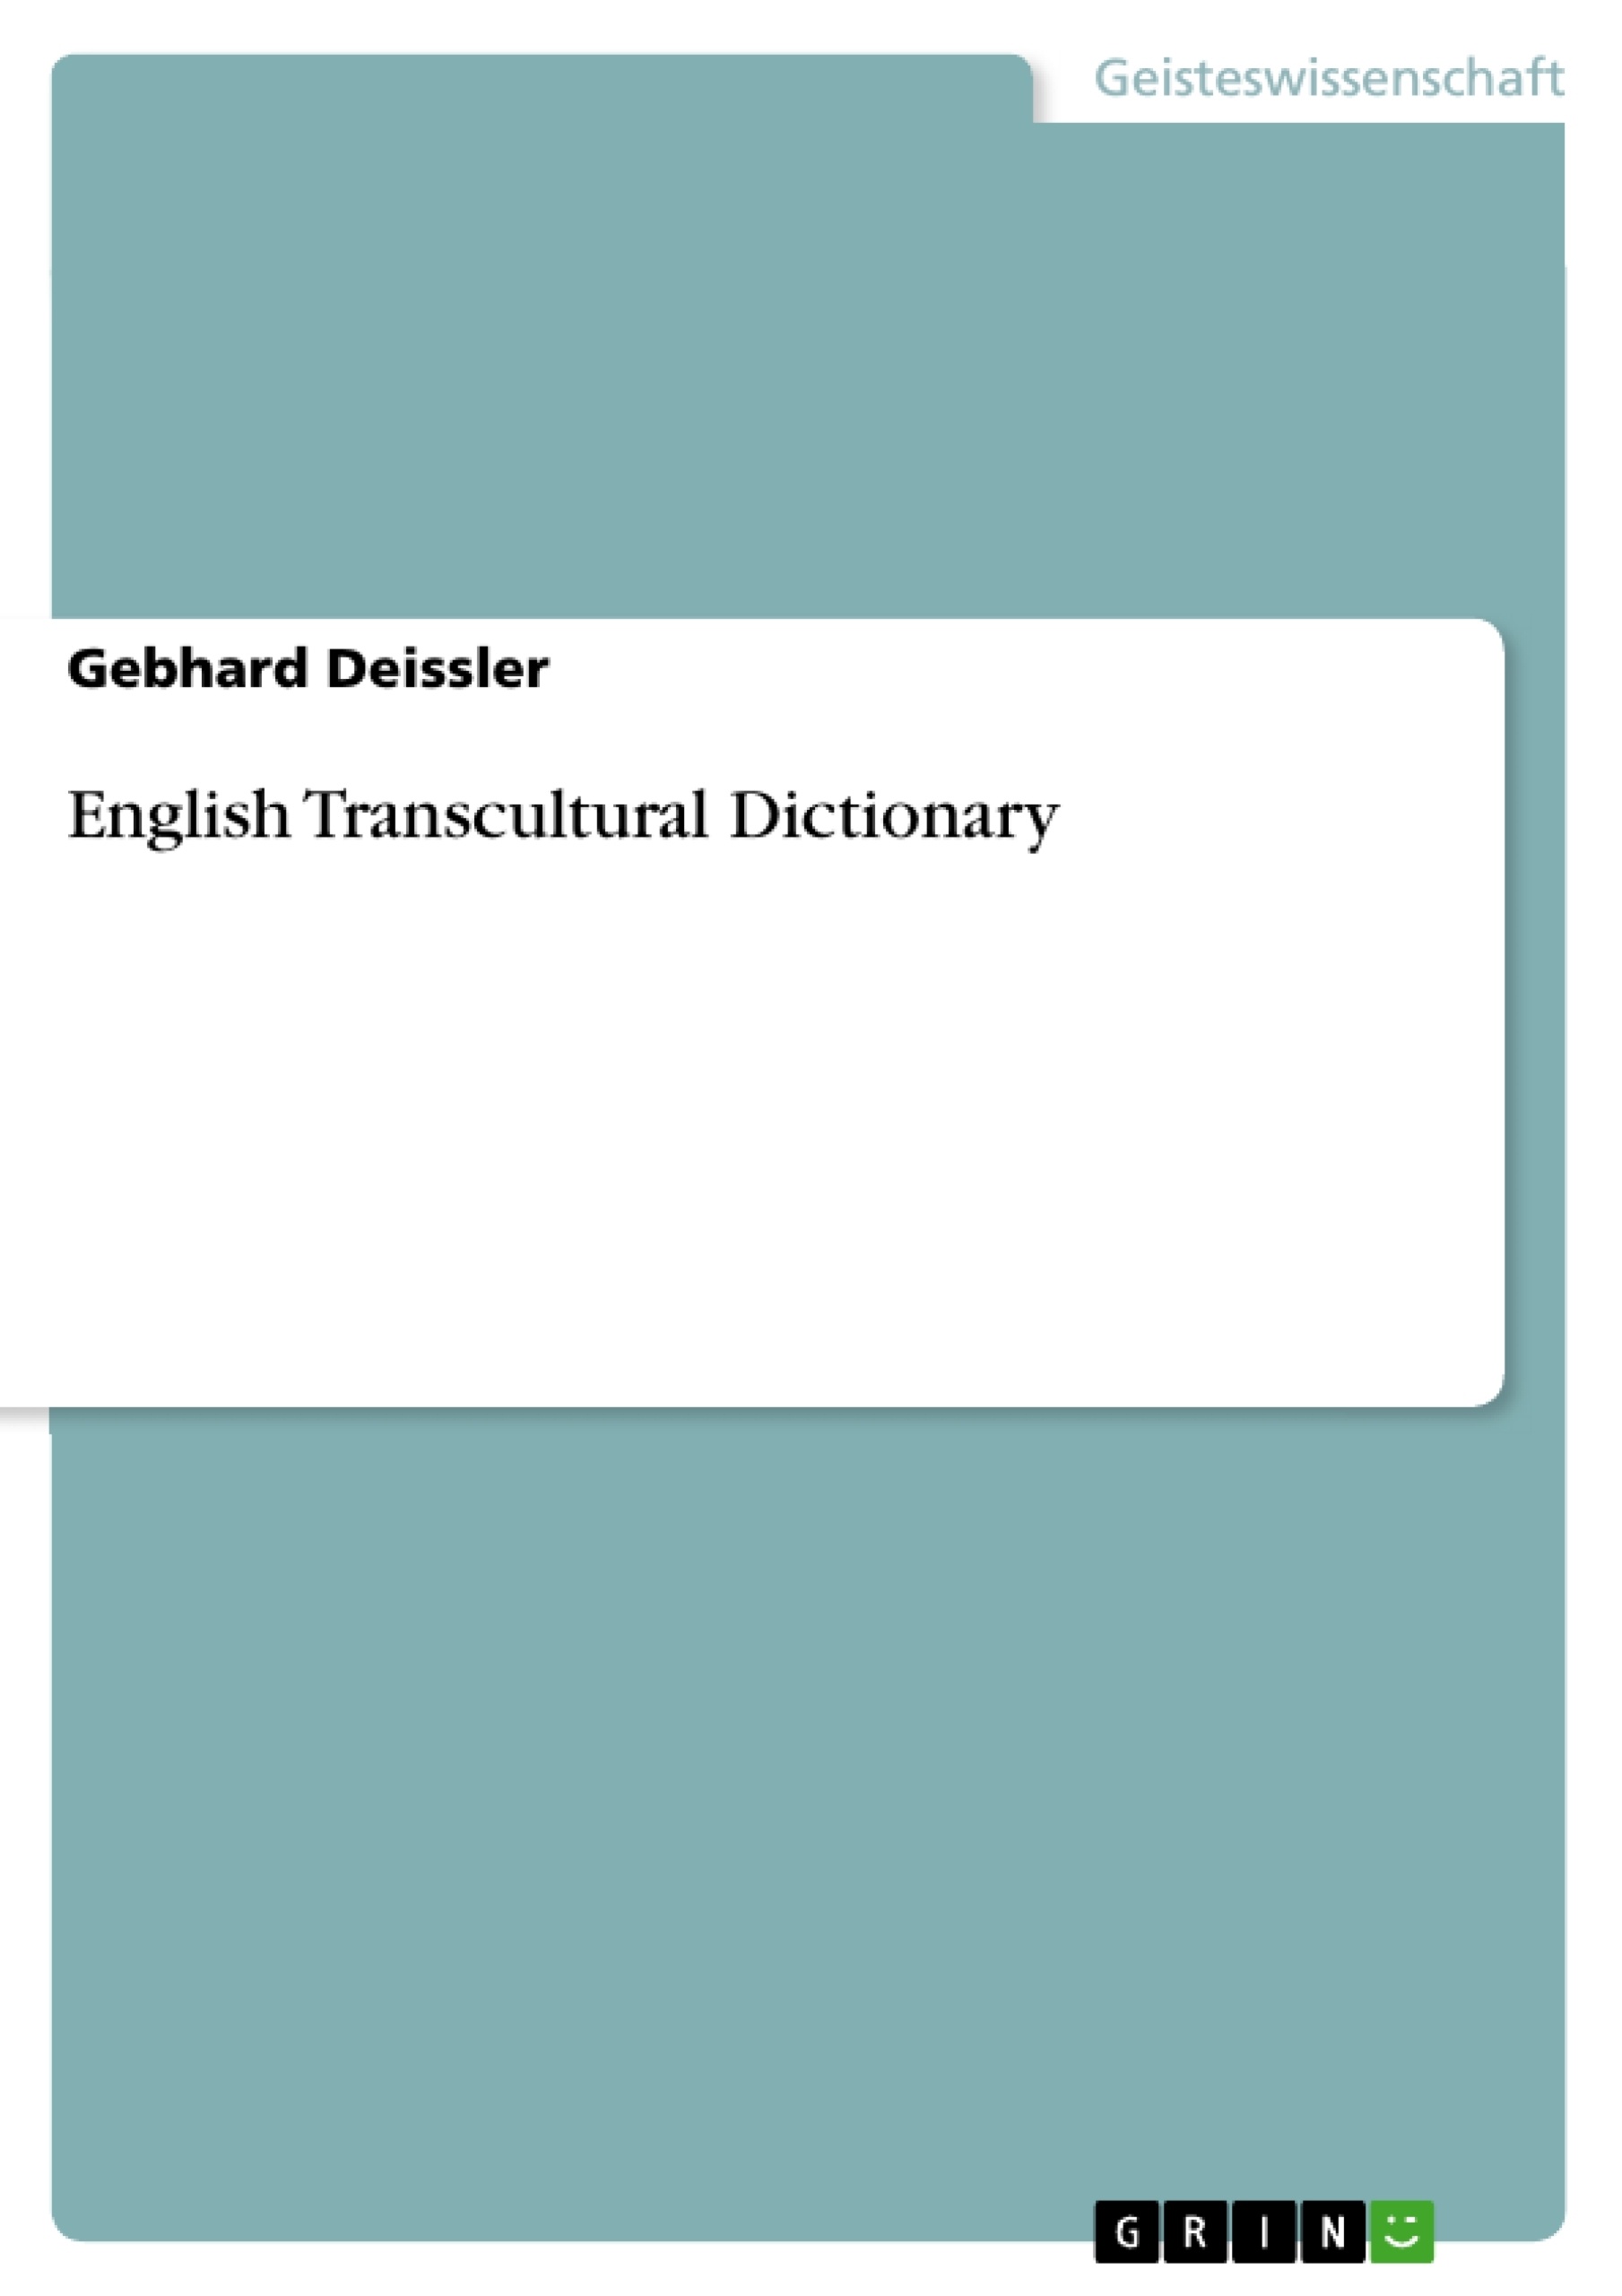 Título: English Transcultural Dictionary